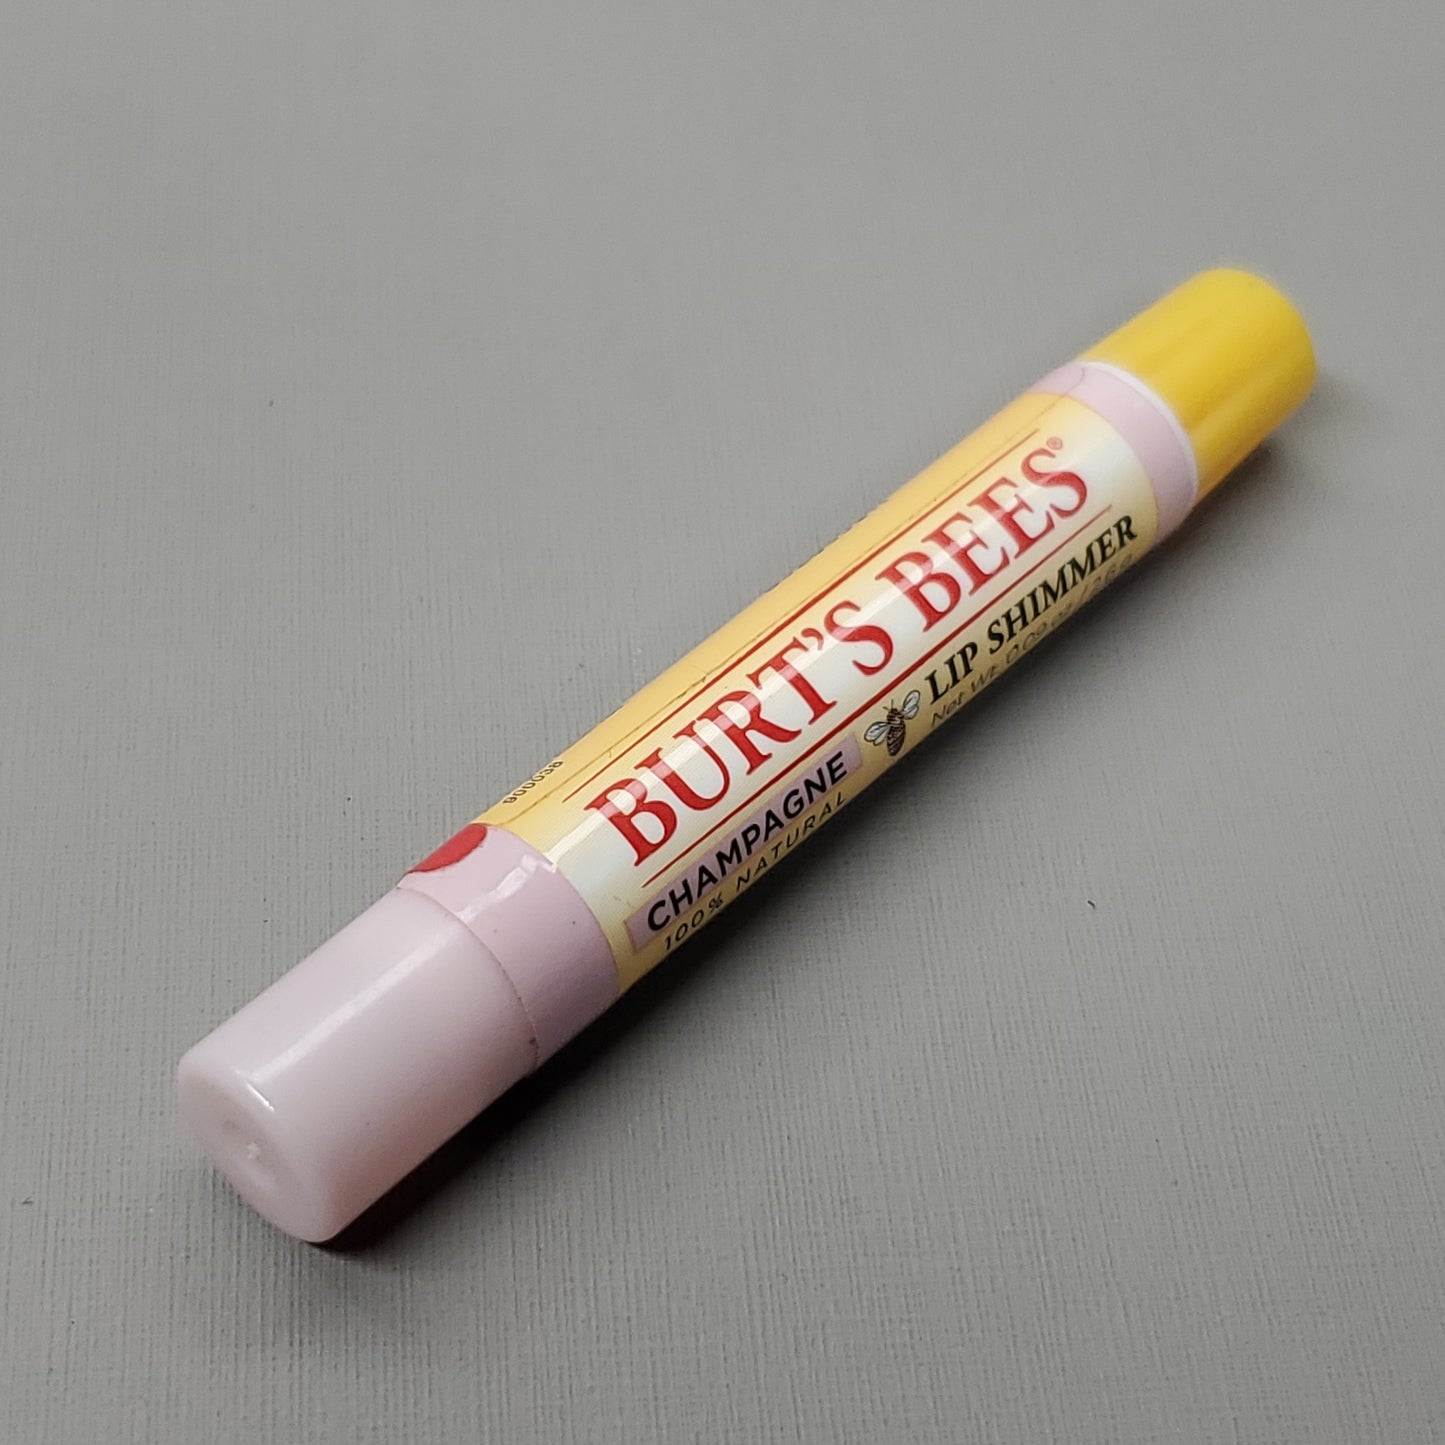 ZA@ BURT'S BEES Lip Shimmer Champagne 4-Pack 100% Natural .09 oz BBD Feb 2023 (AS-IS)